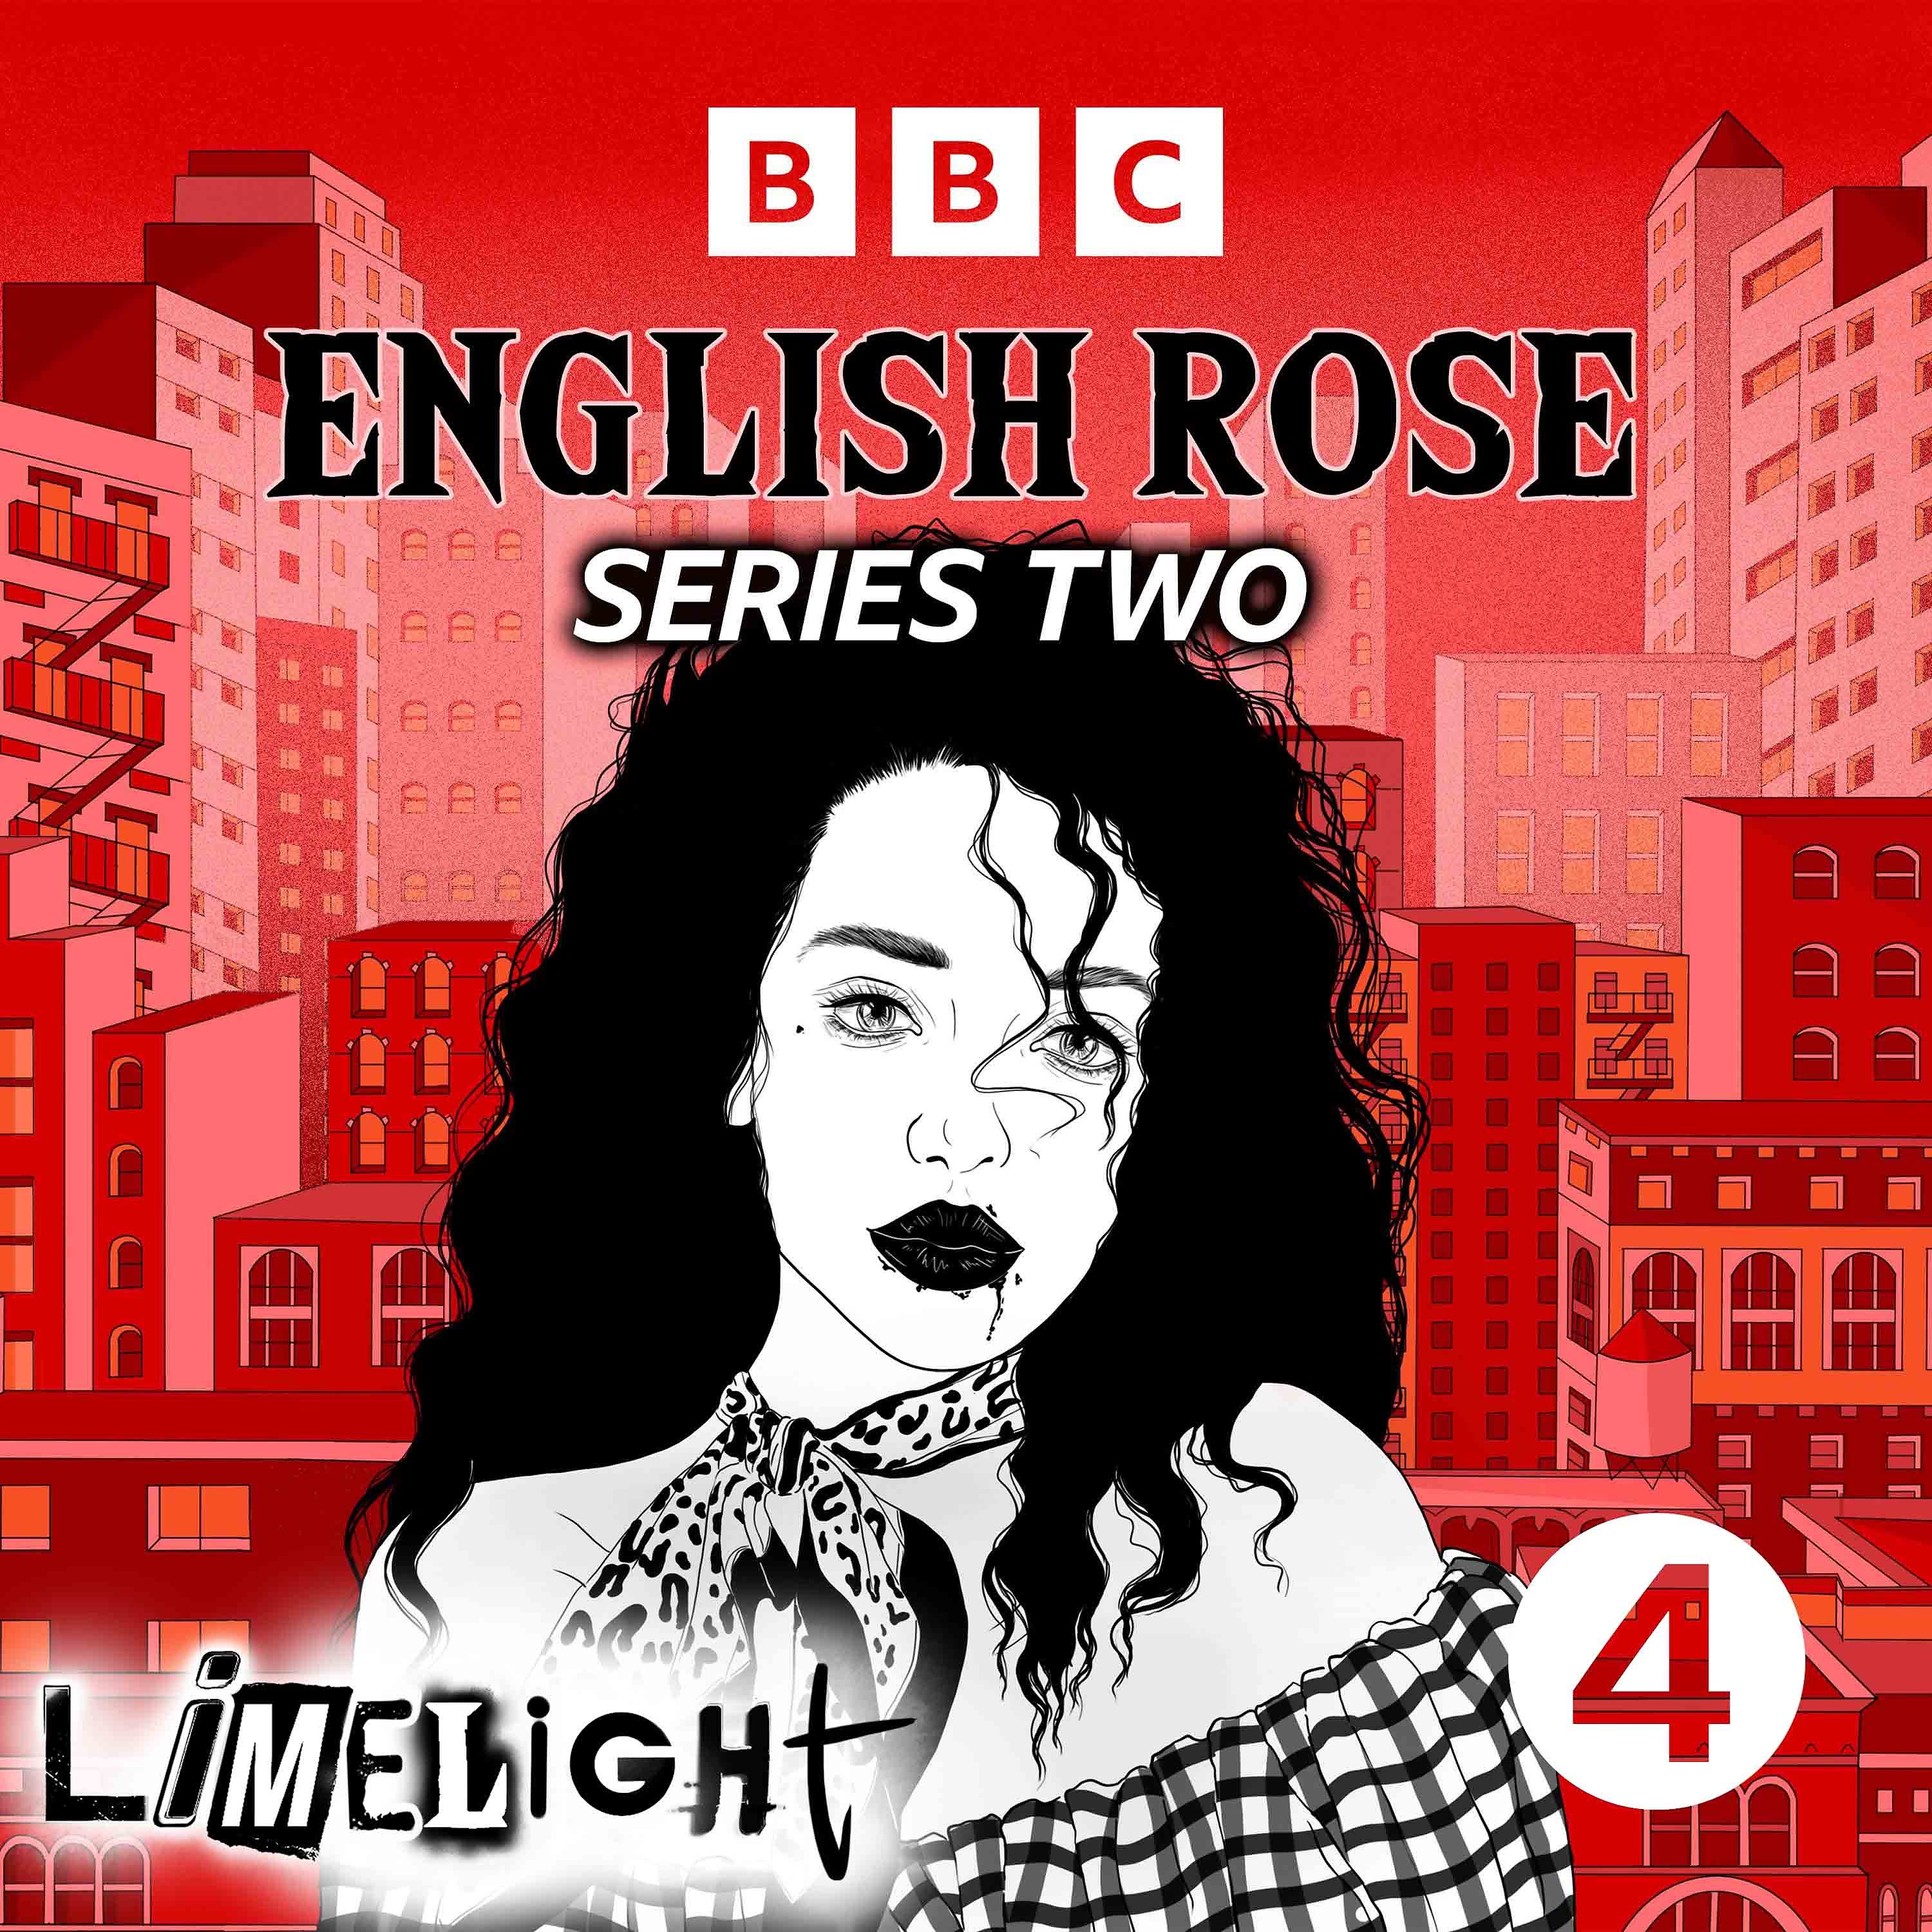 Previously on English Rose